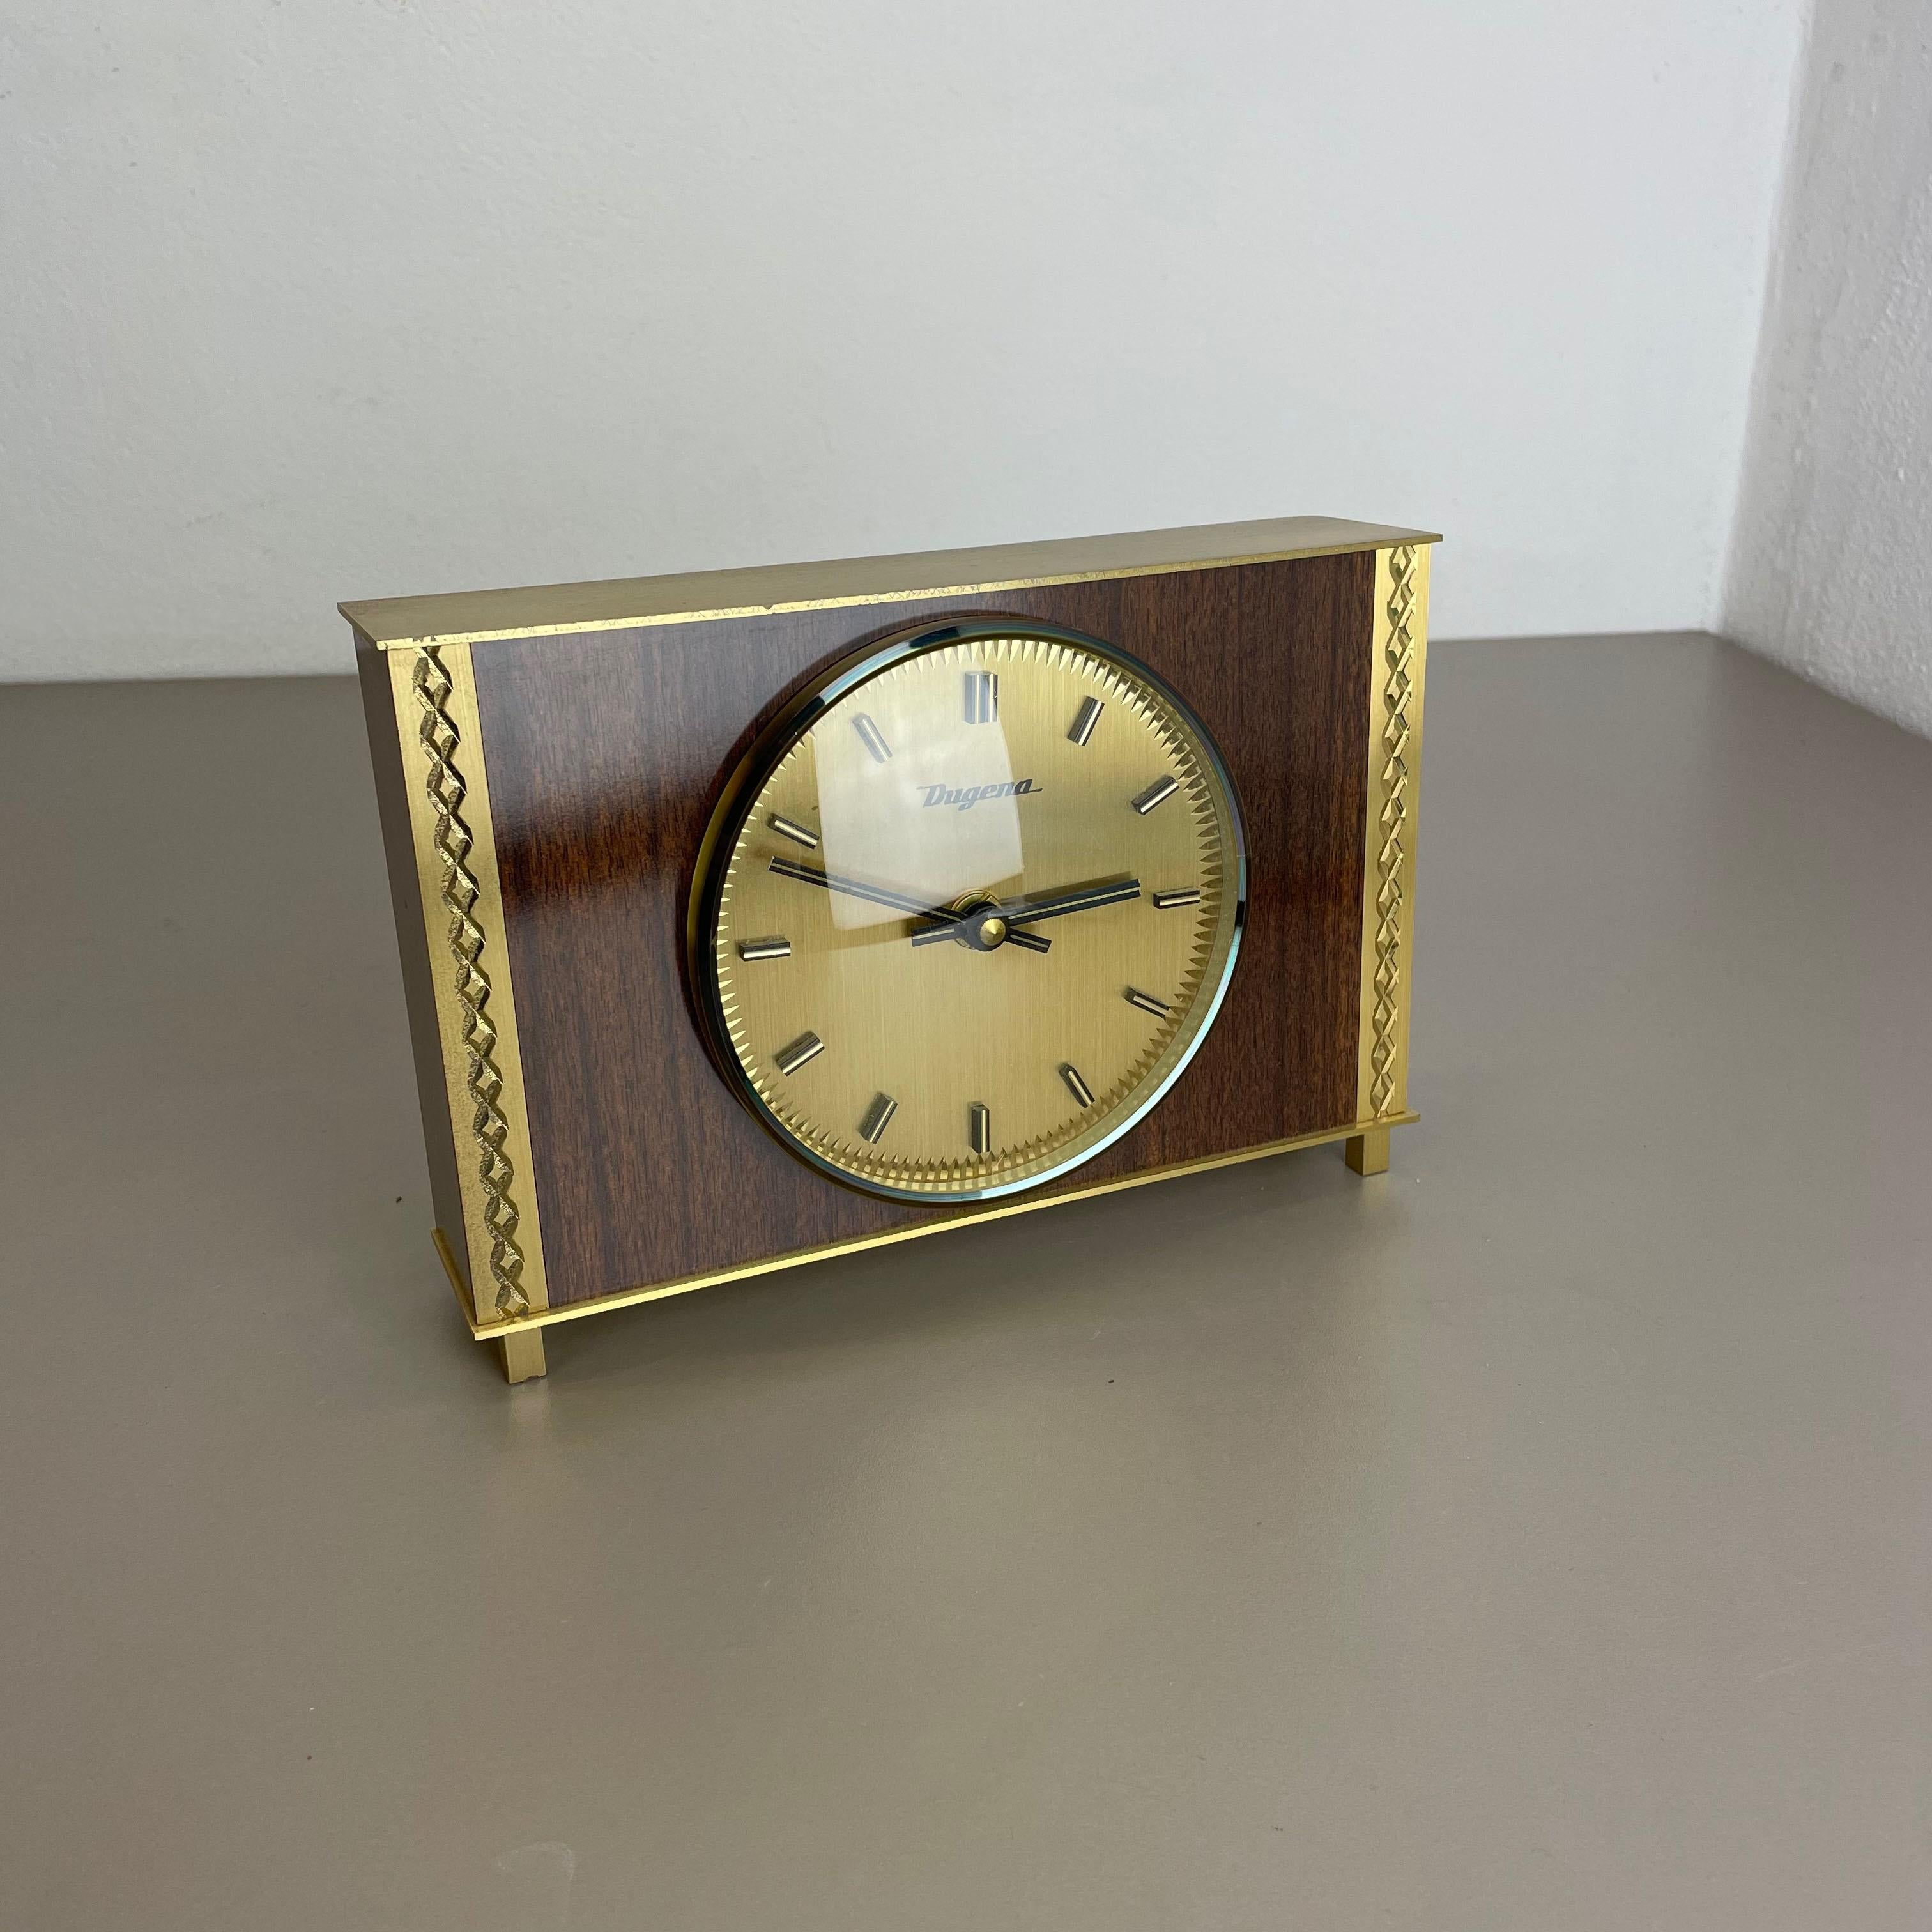 20th Century Vintage 1960s Modernist Wooden Teak Brass Table Clock by Dugena, Germany For Sale